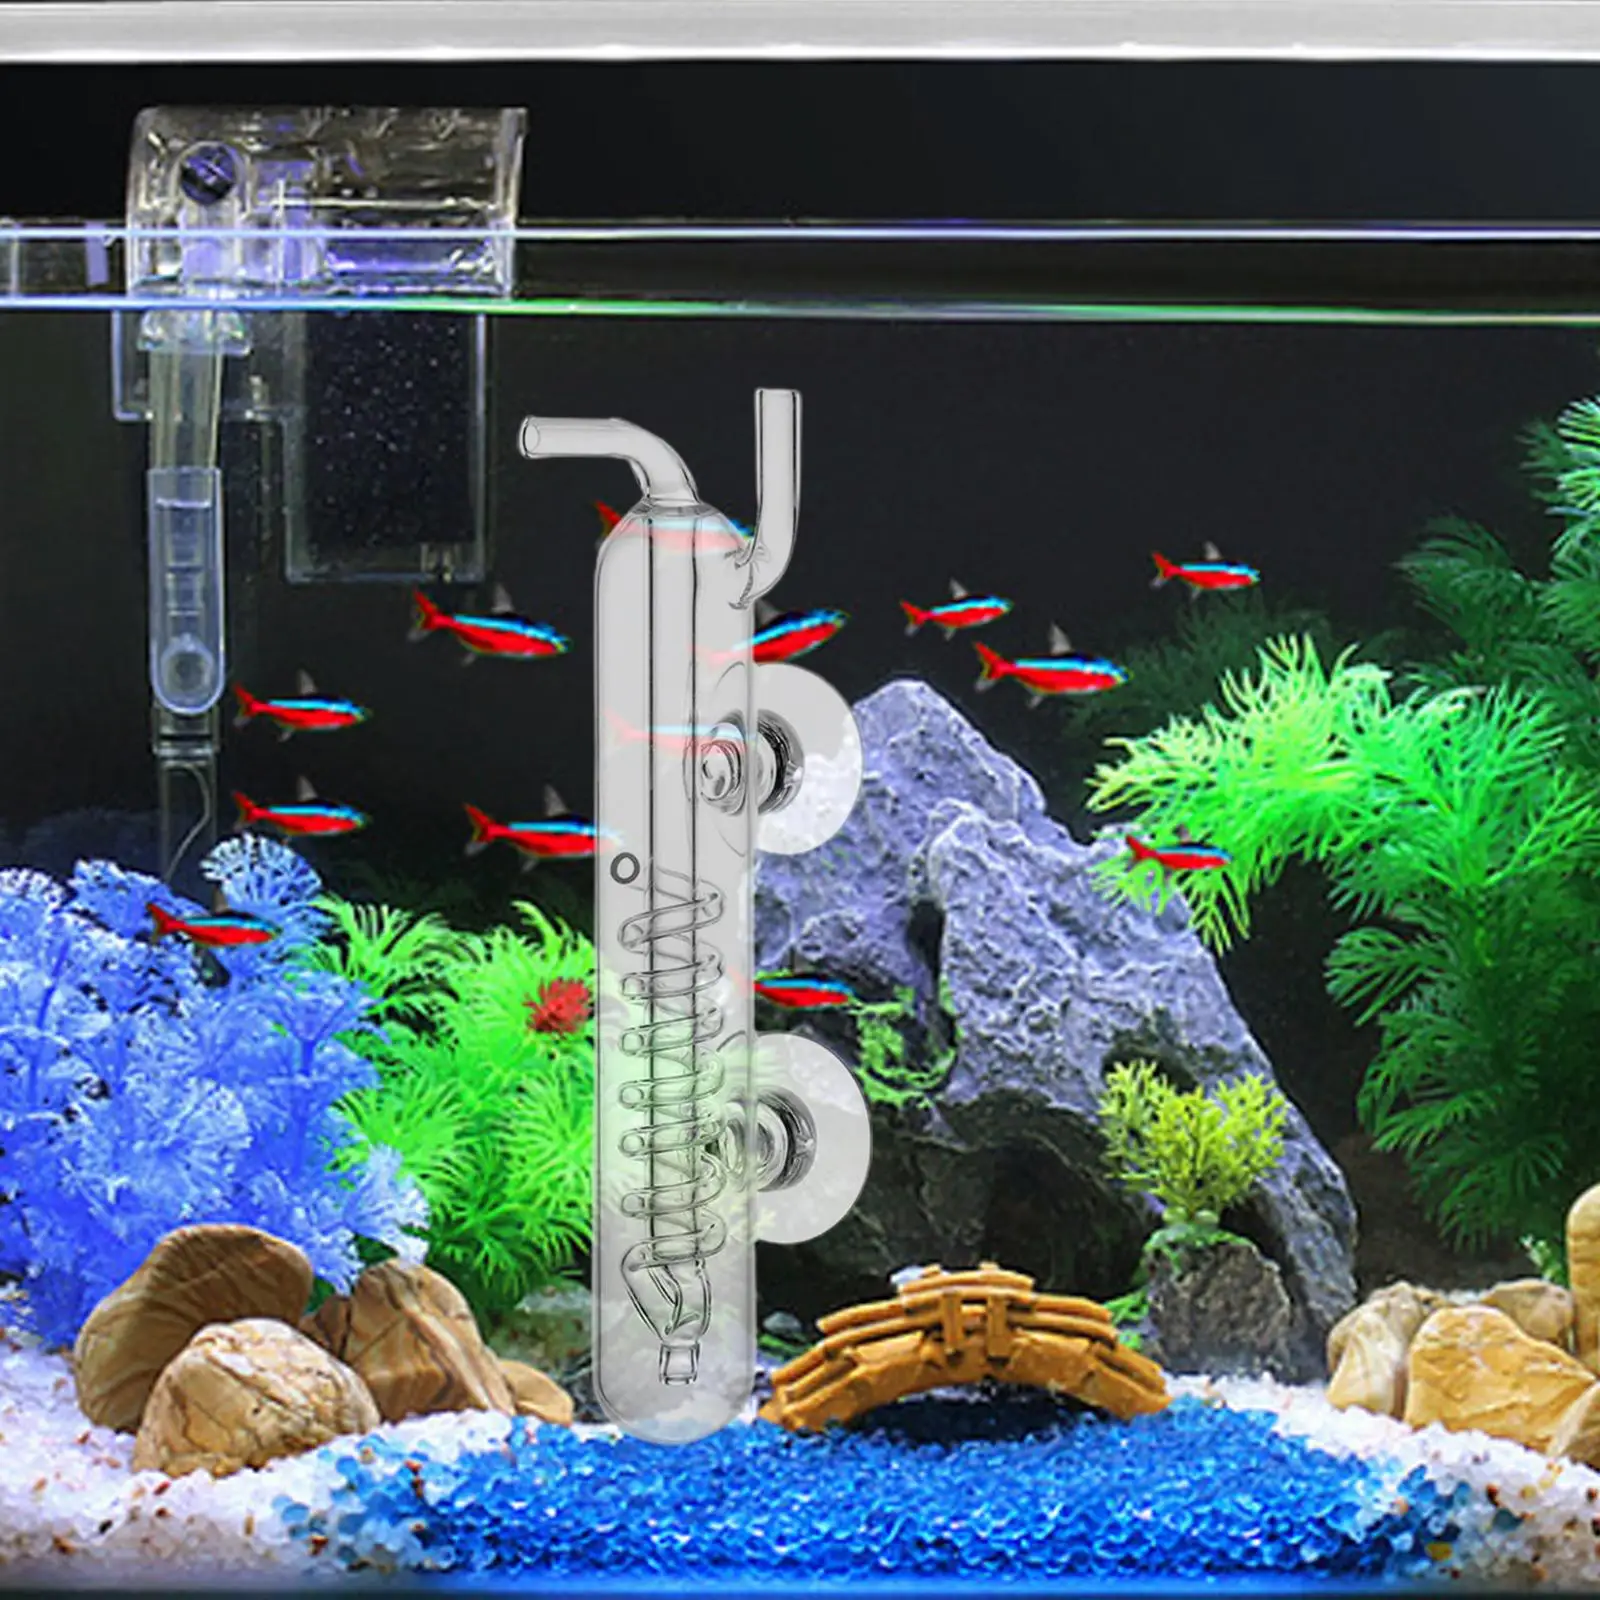 Fish Tank Plant CO2 Atomizer Silent Carbon Dioxide Diffuser Glass Clear for Household Fish Tank Aquarium Water Plants Equipment